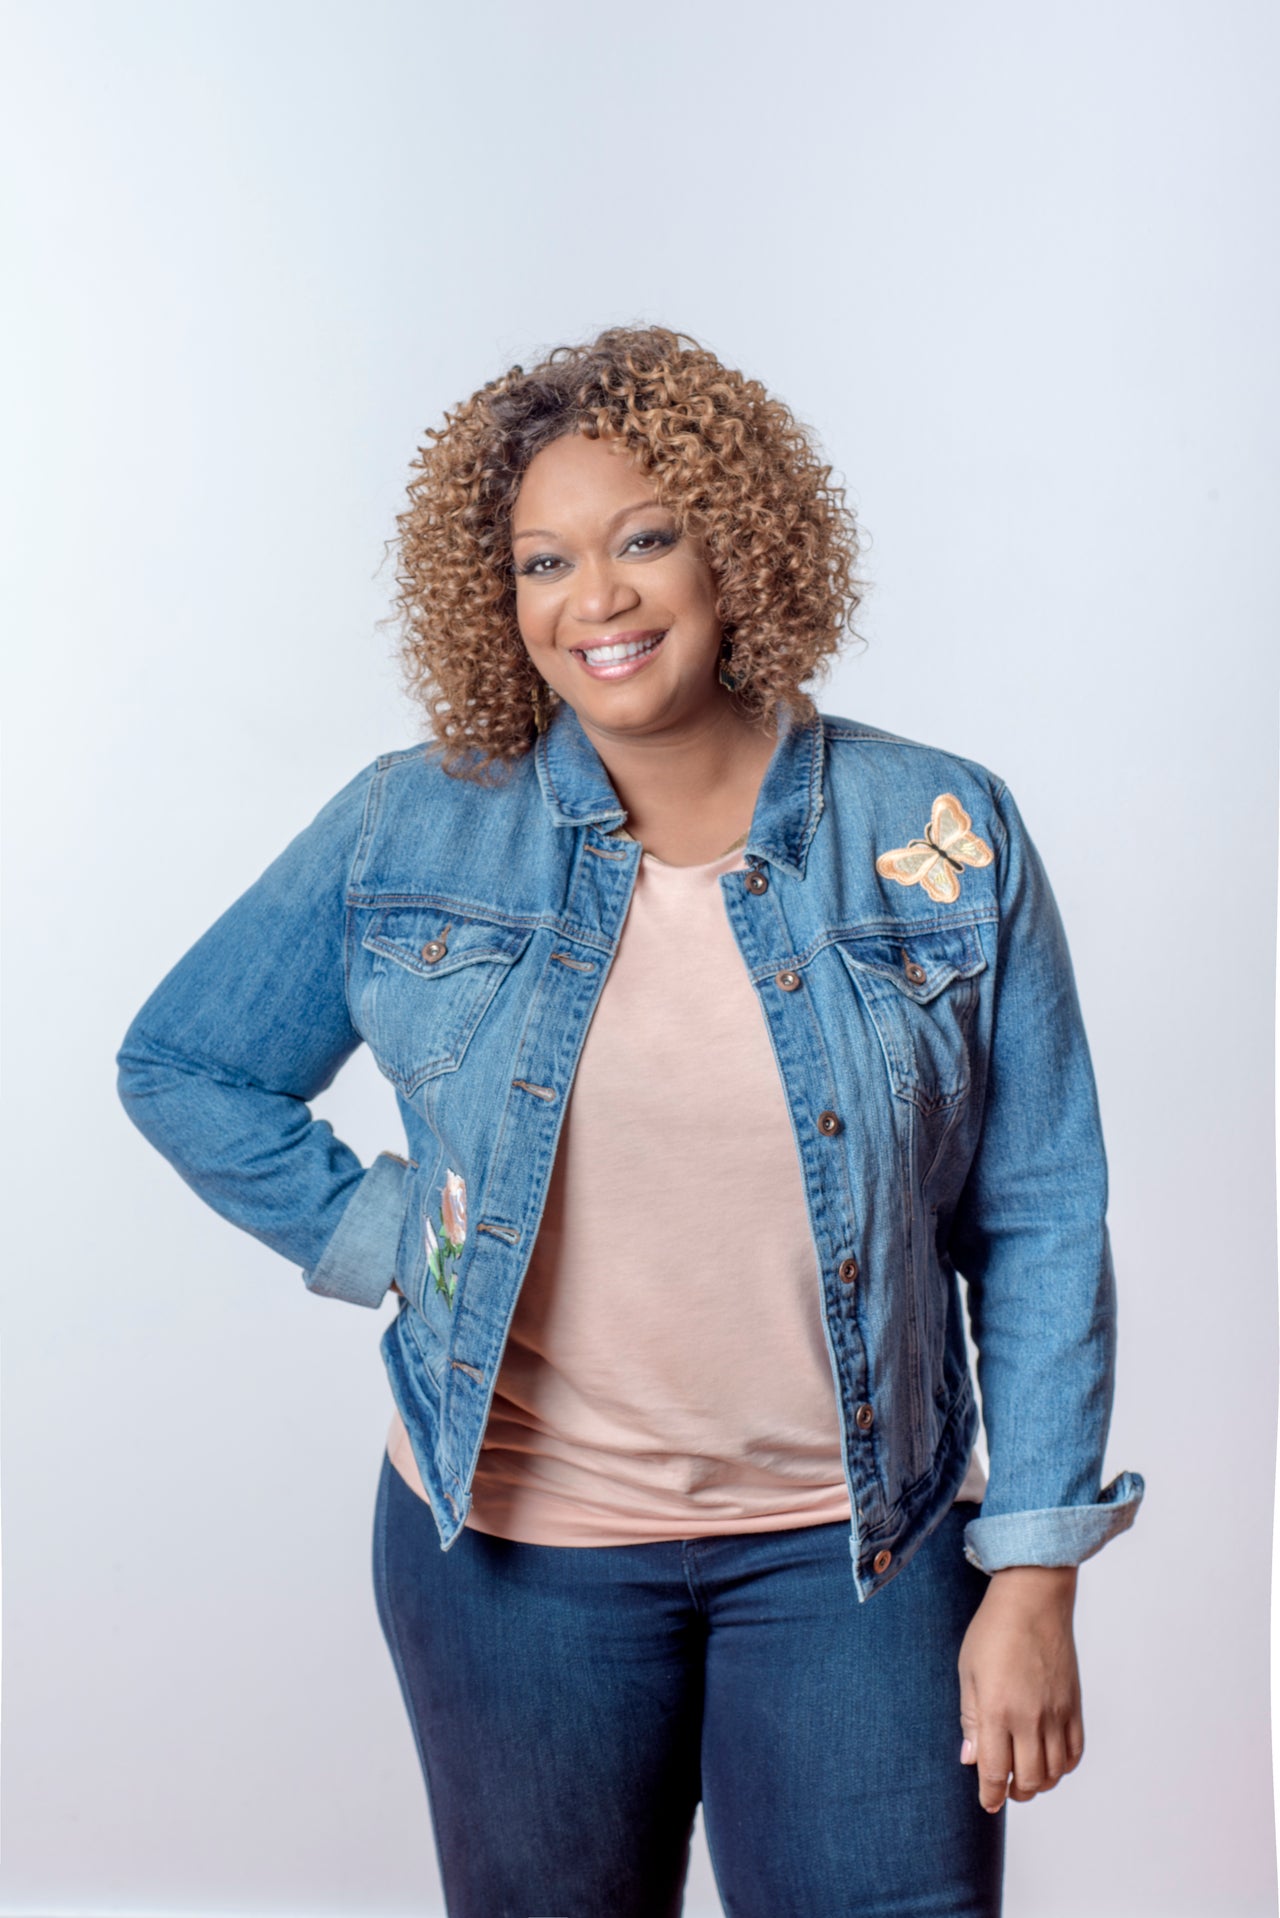 Chef Sunny Anderson Shares 3 Ways To Use Tea For Delicious Summer Food And Drink Recipes Essence 